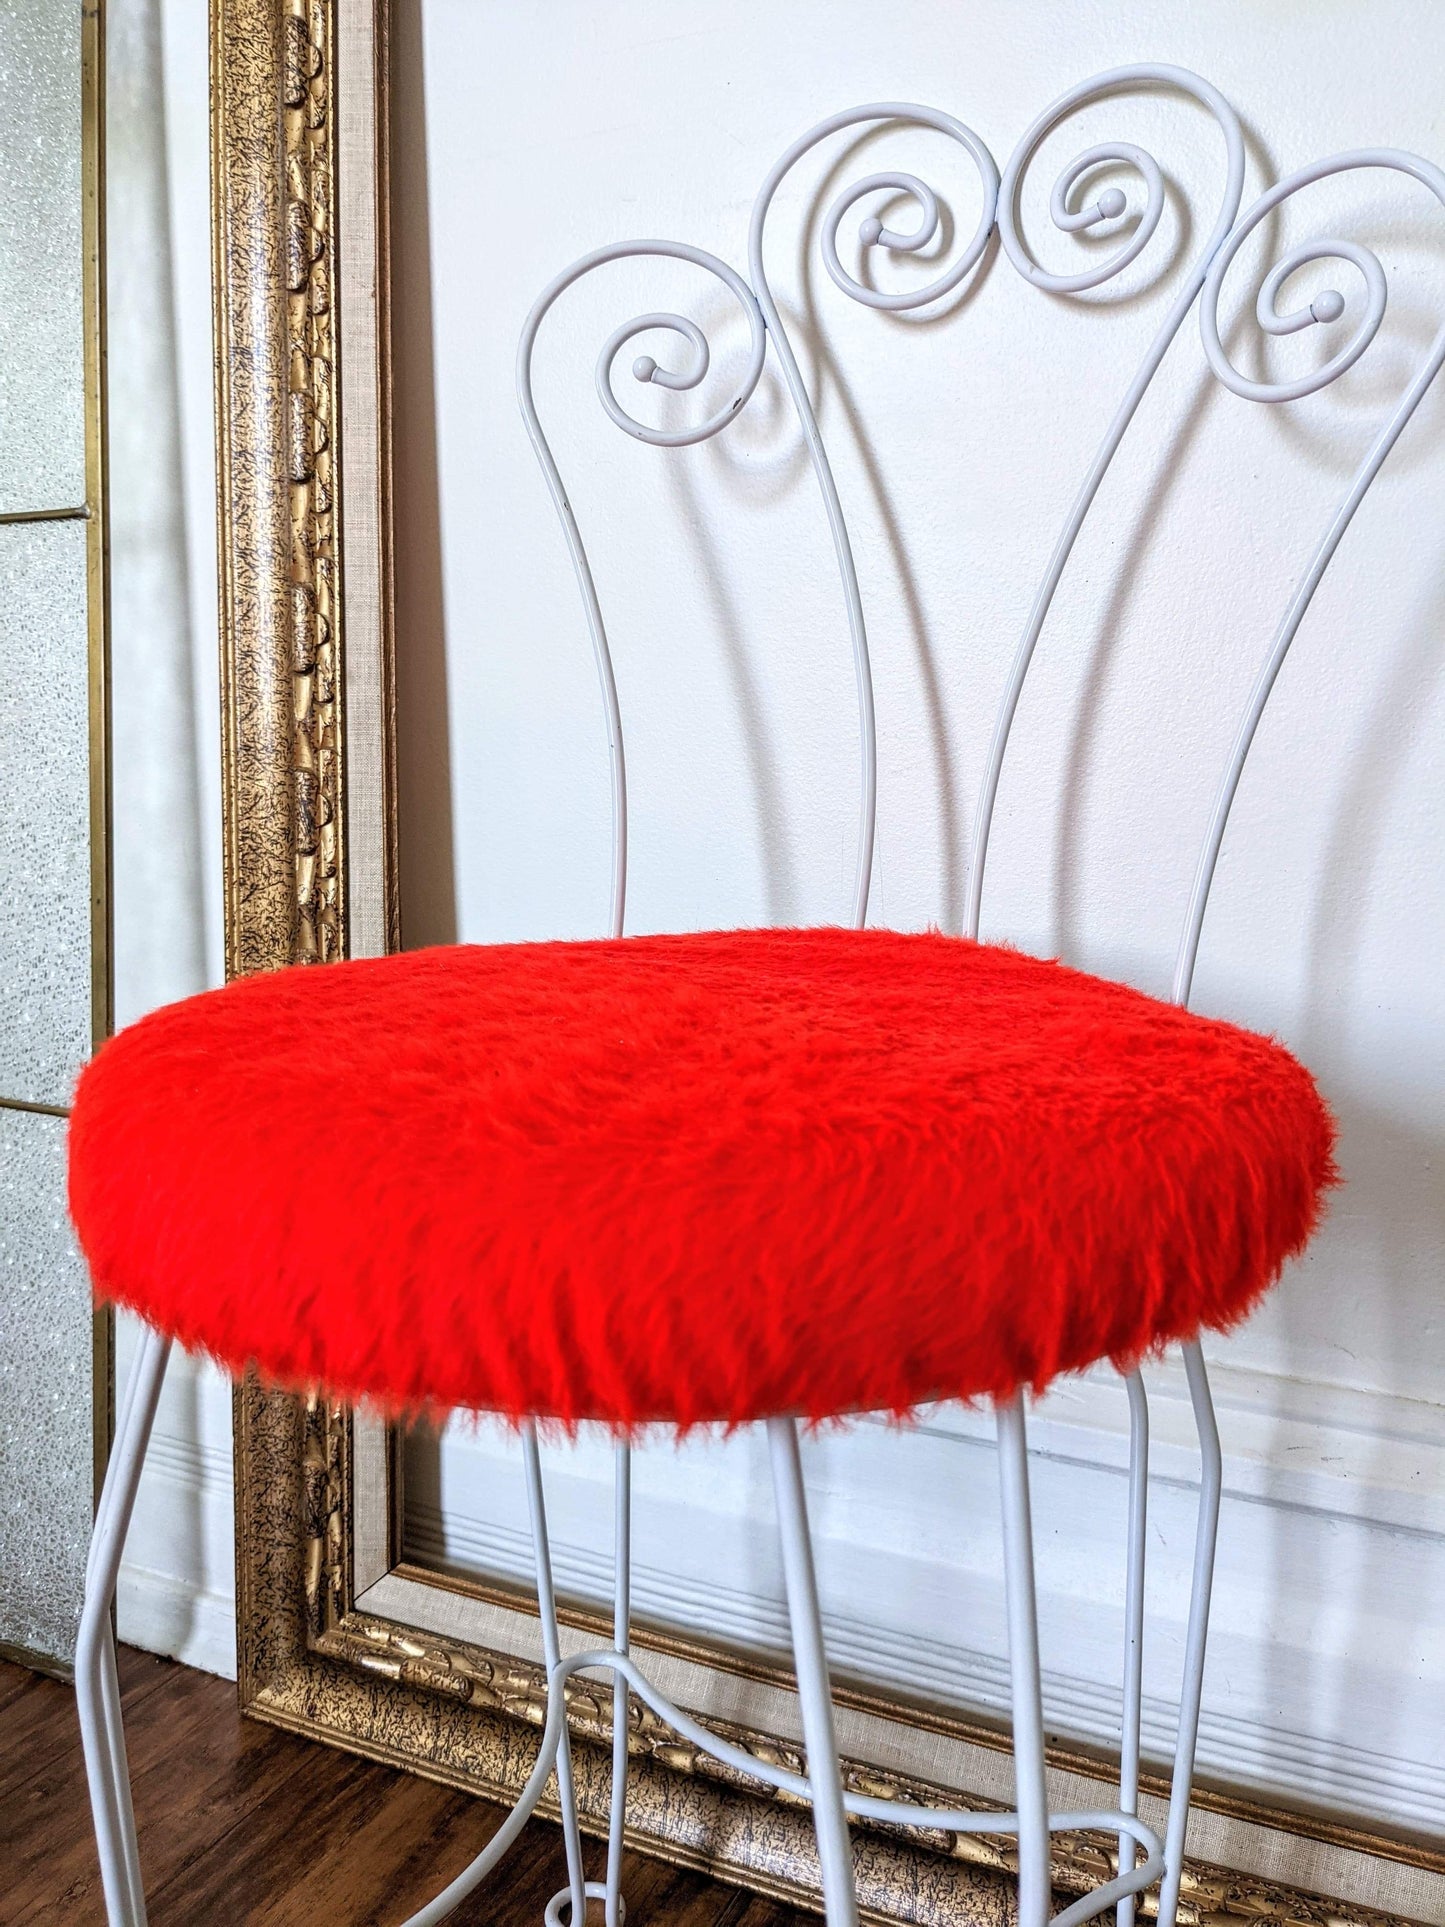 The Bella Donna Chair